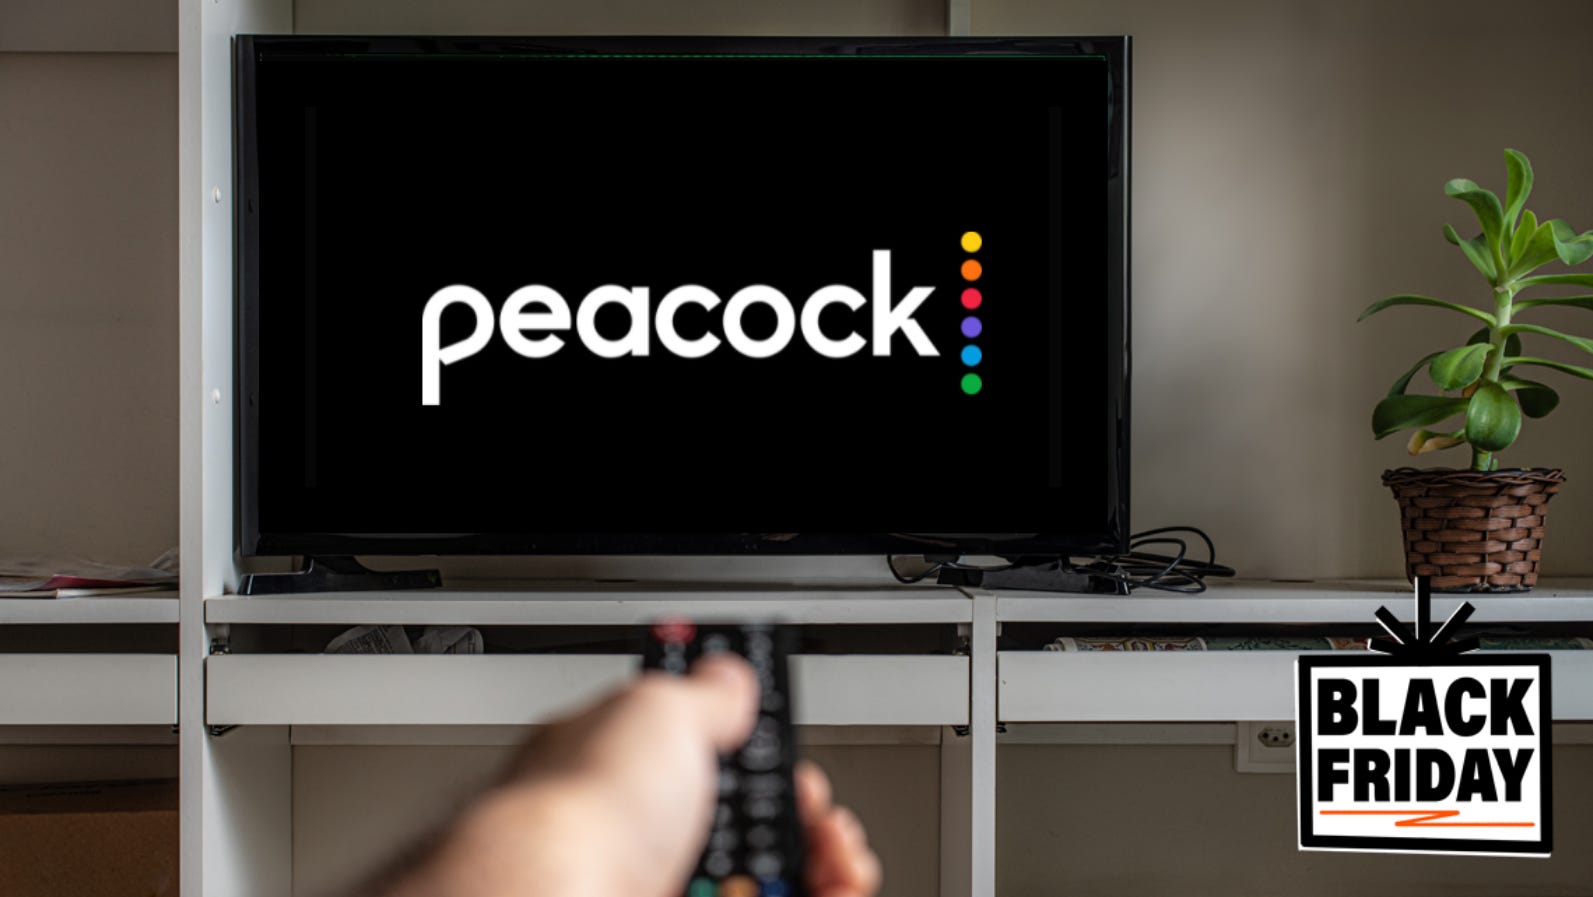 Black Friday 2021 Peacock Premium offers 50 savings on six months